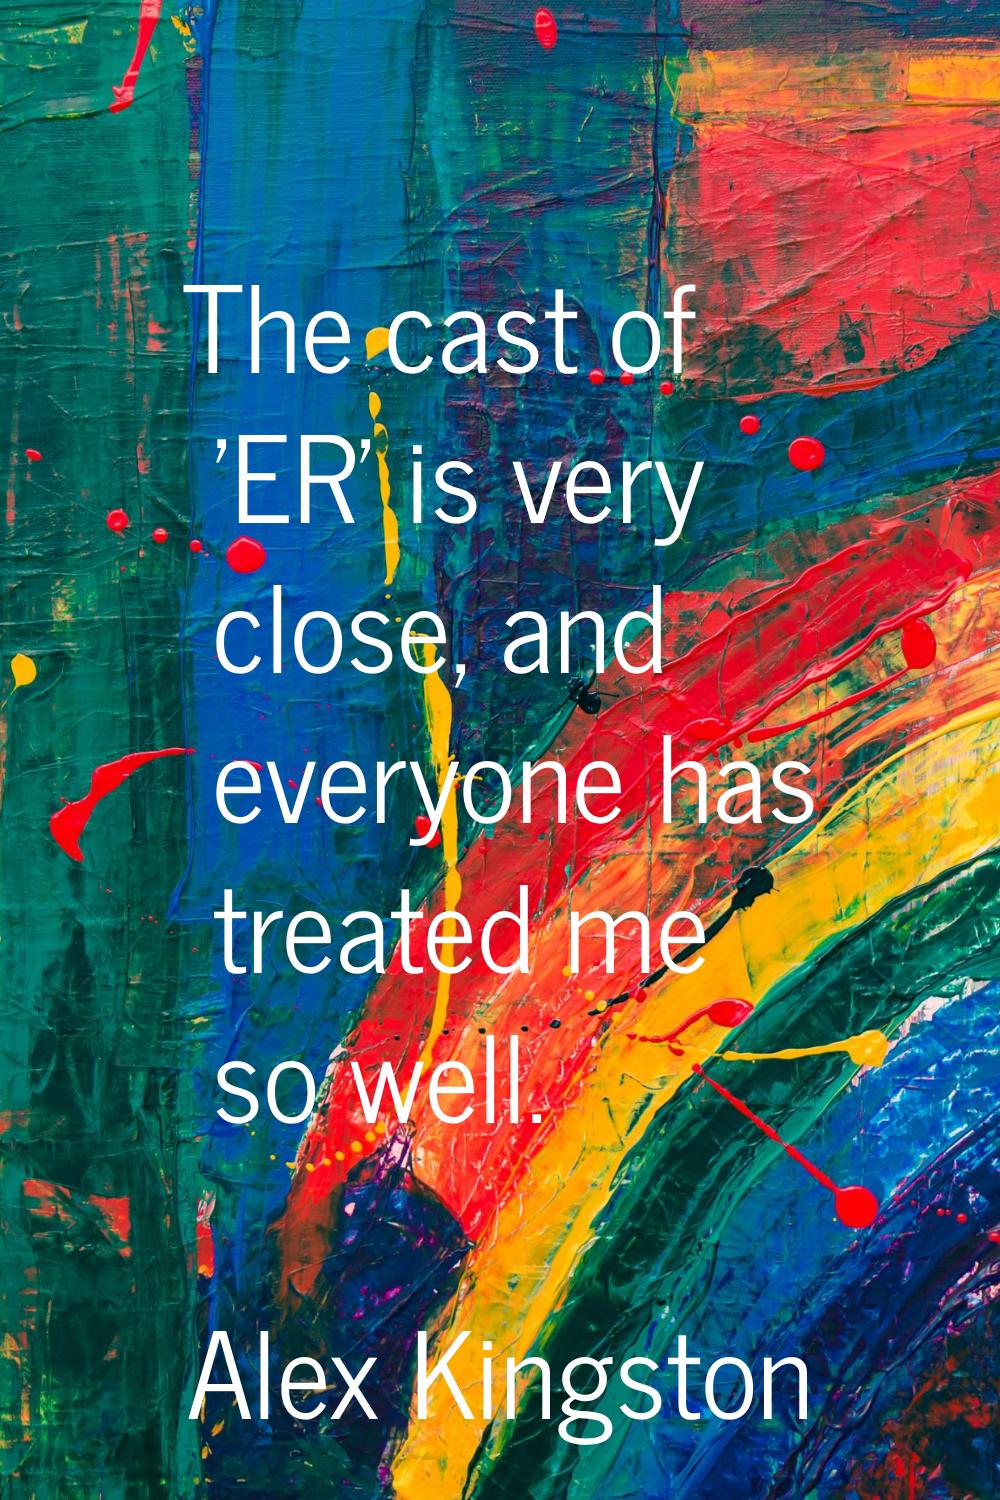 The cast of 'ER' is very close, and everyone has treated me so well.